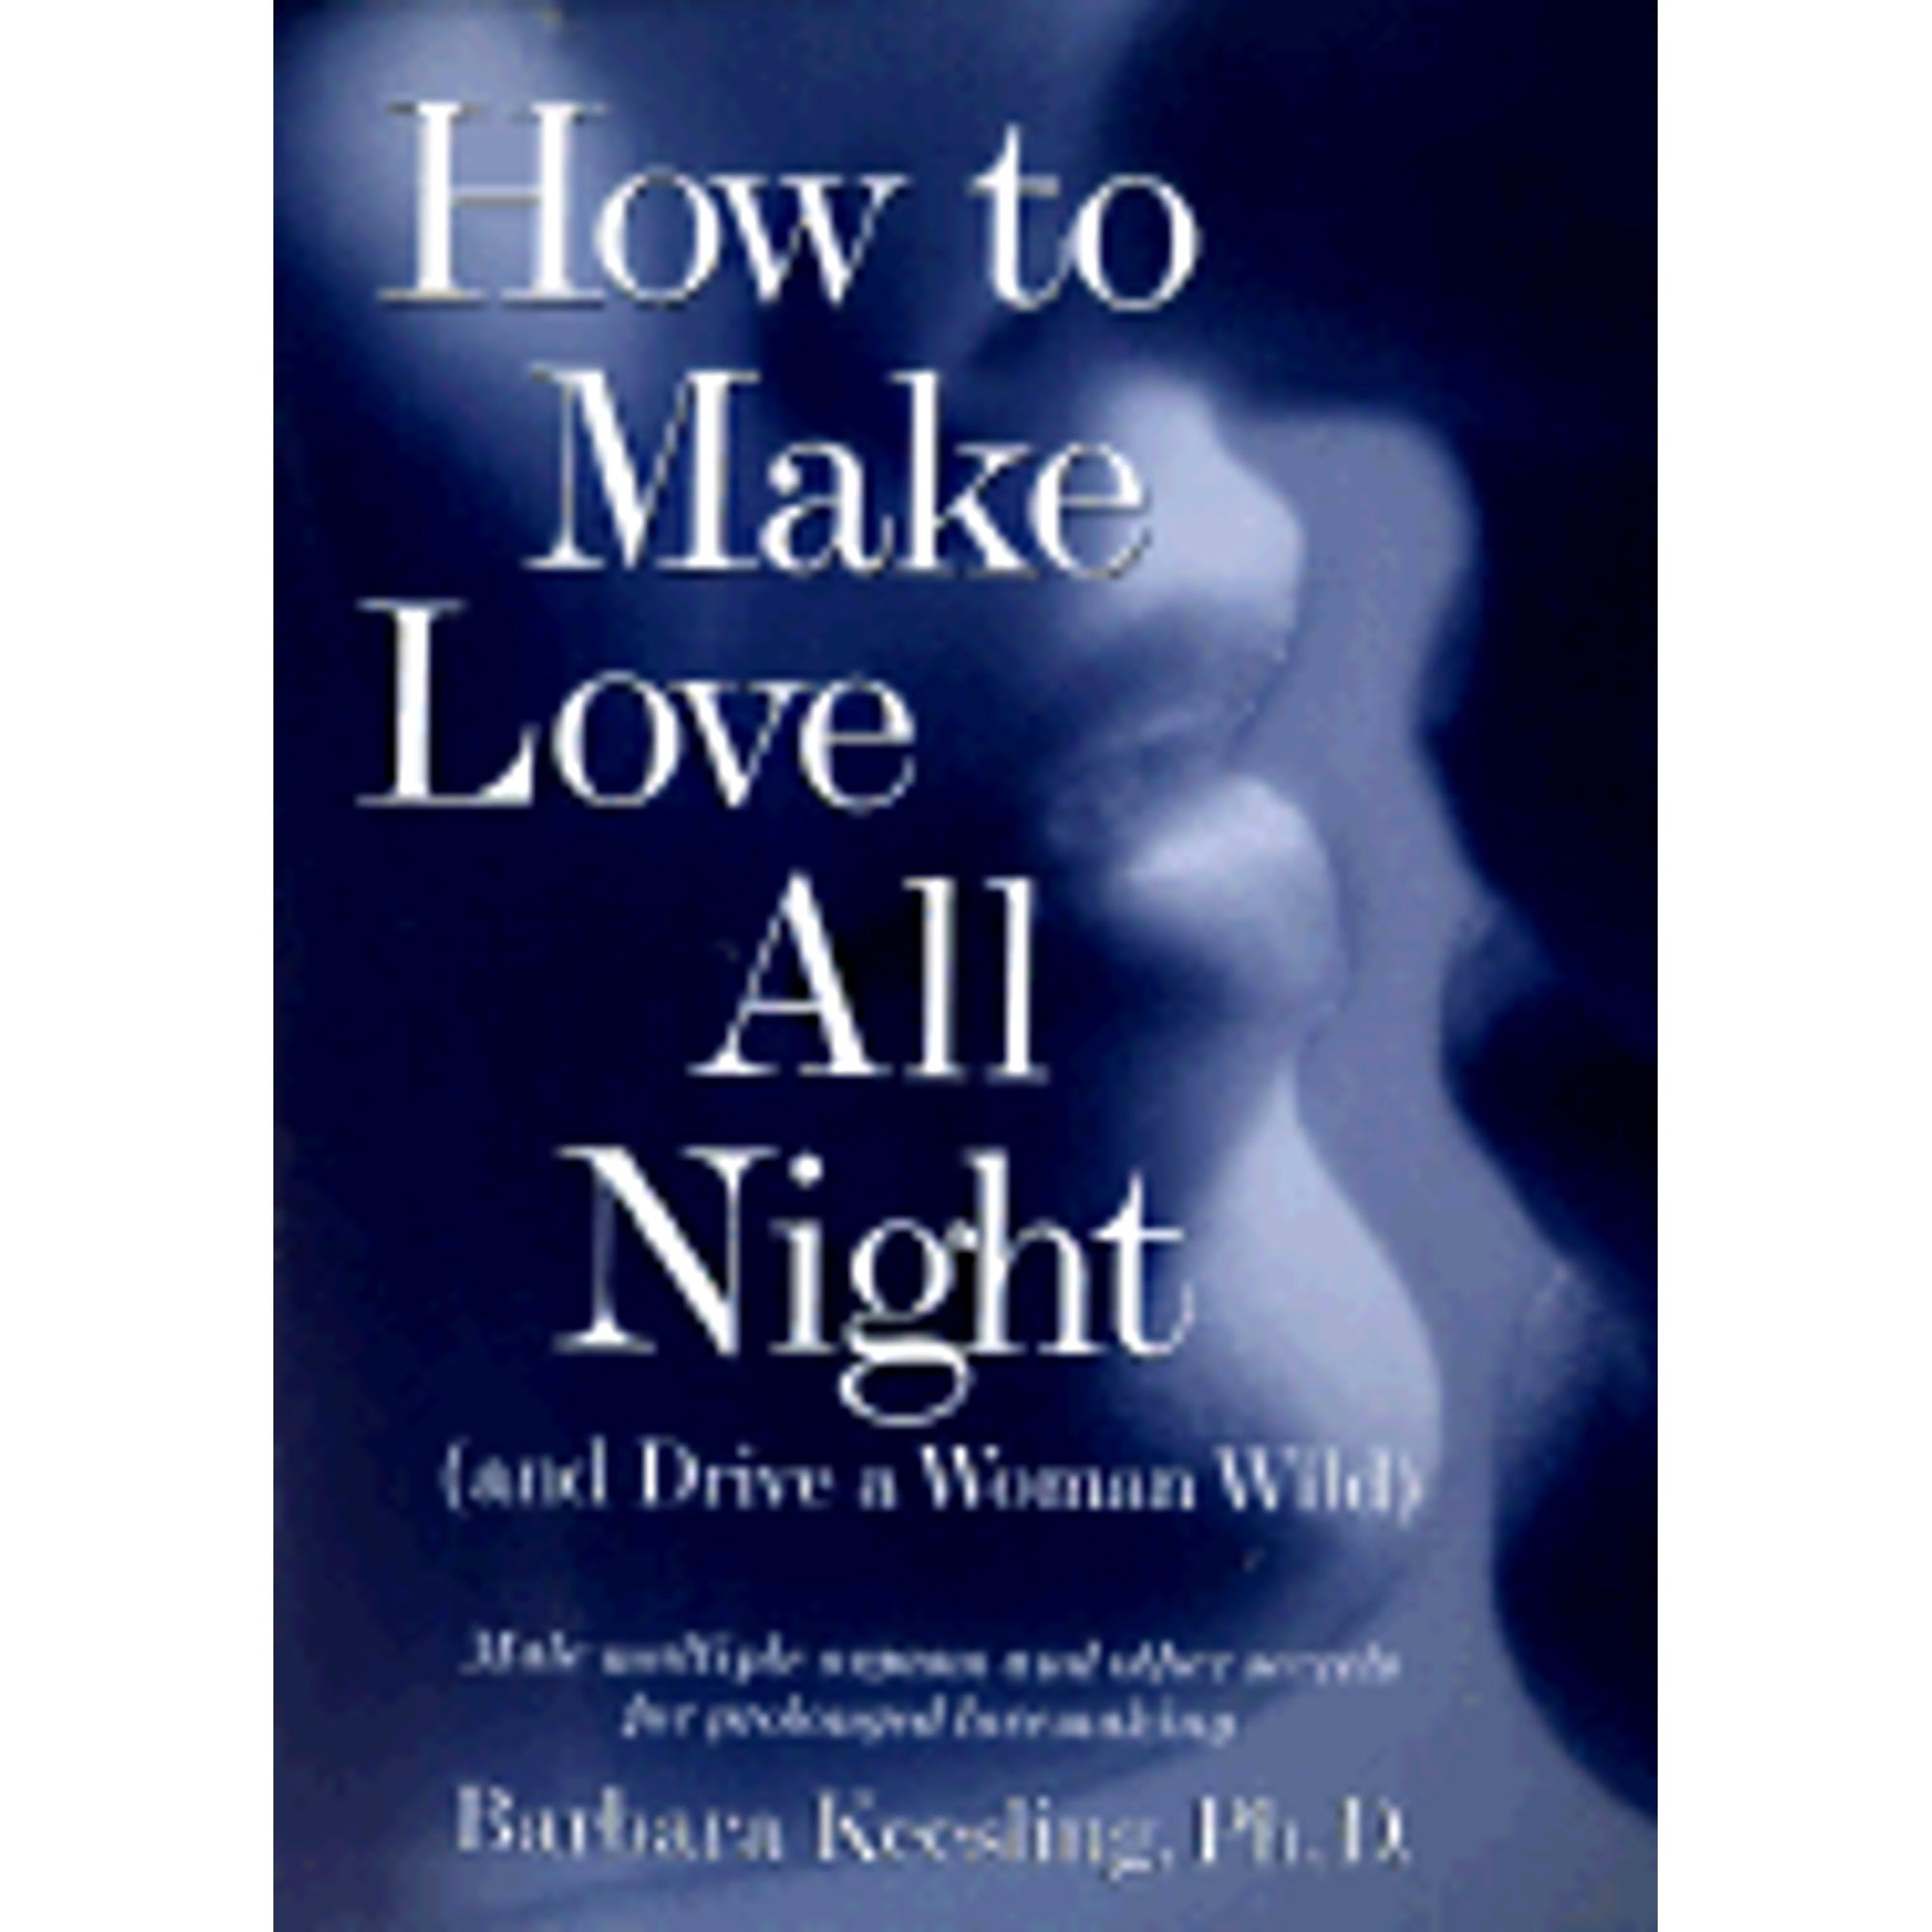 How to Make Love All Night and Drive a Woman Wild